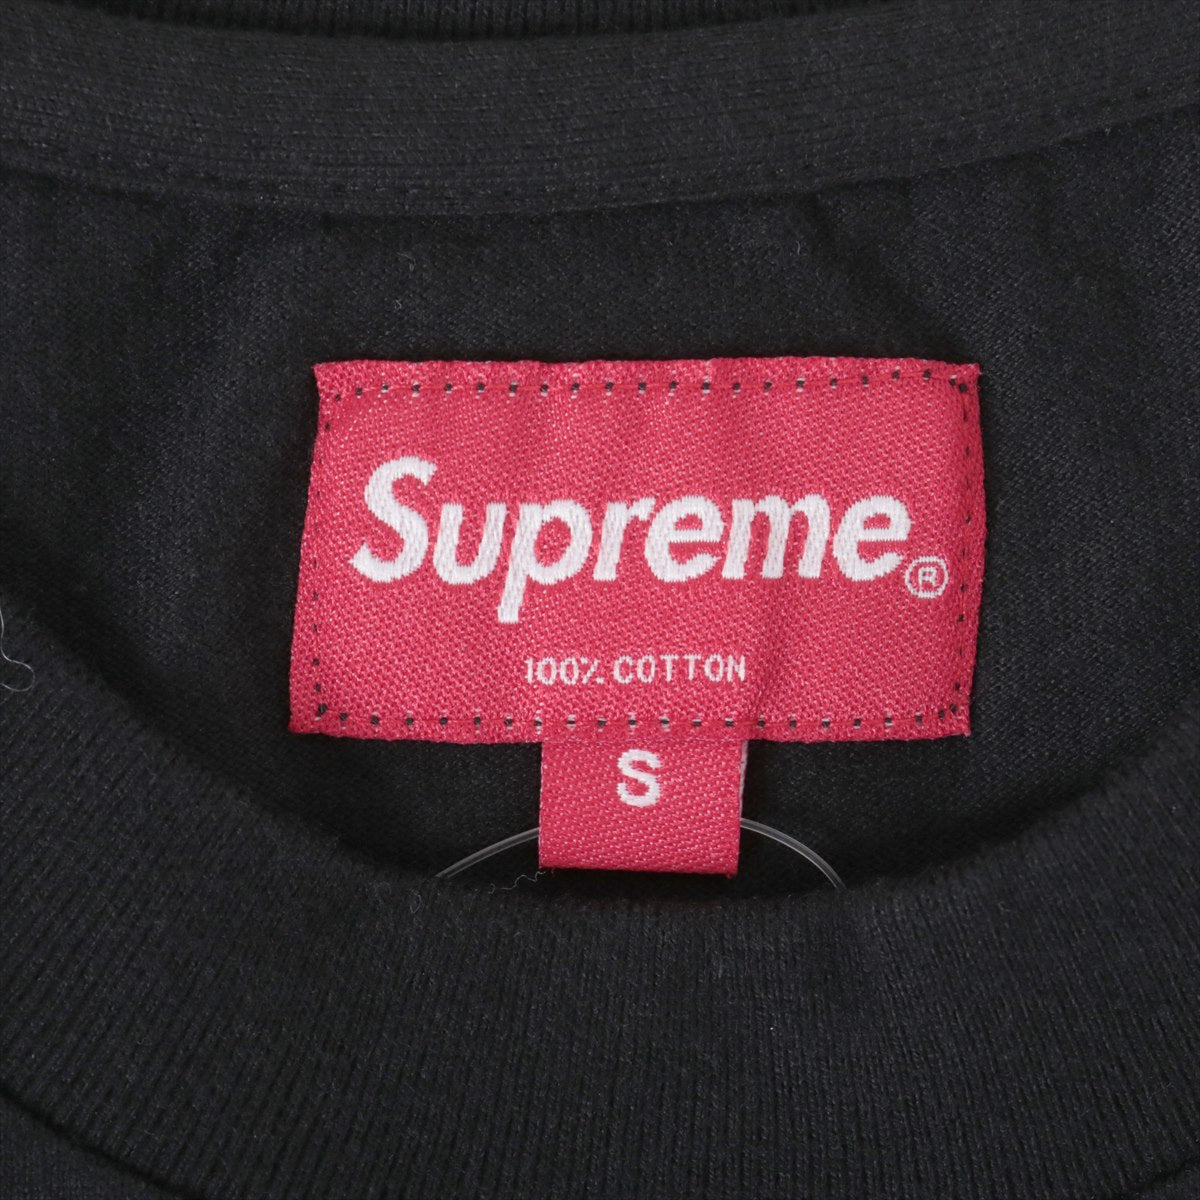 Supreme Cotton T-shirt S Men's Black  FIRST AND BEST